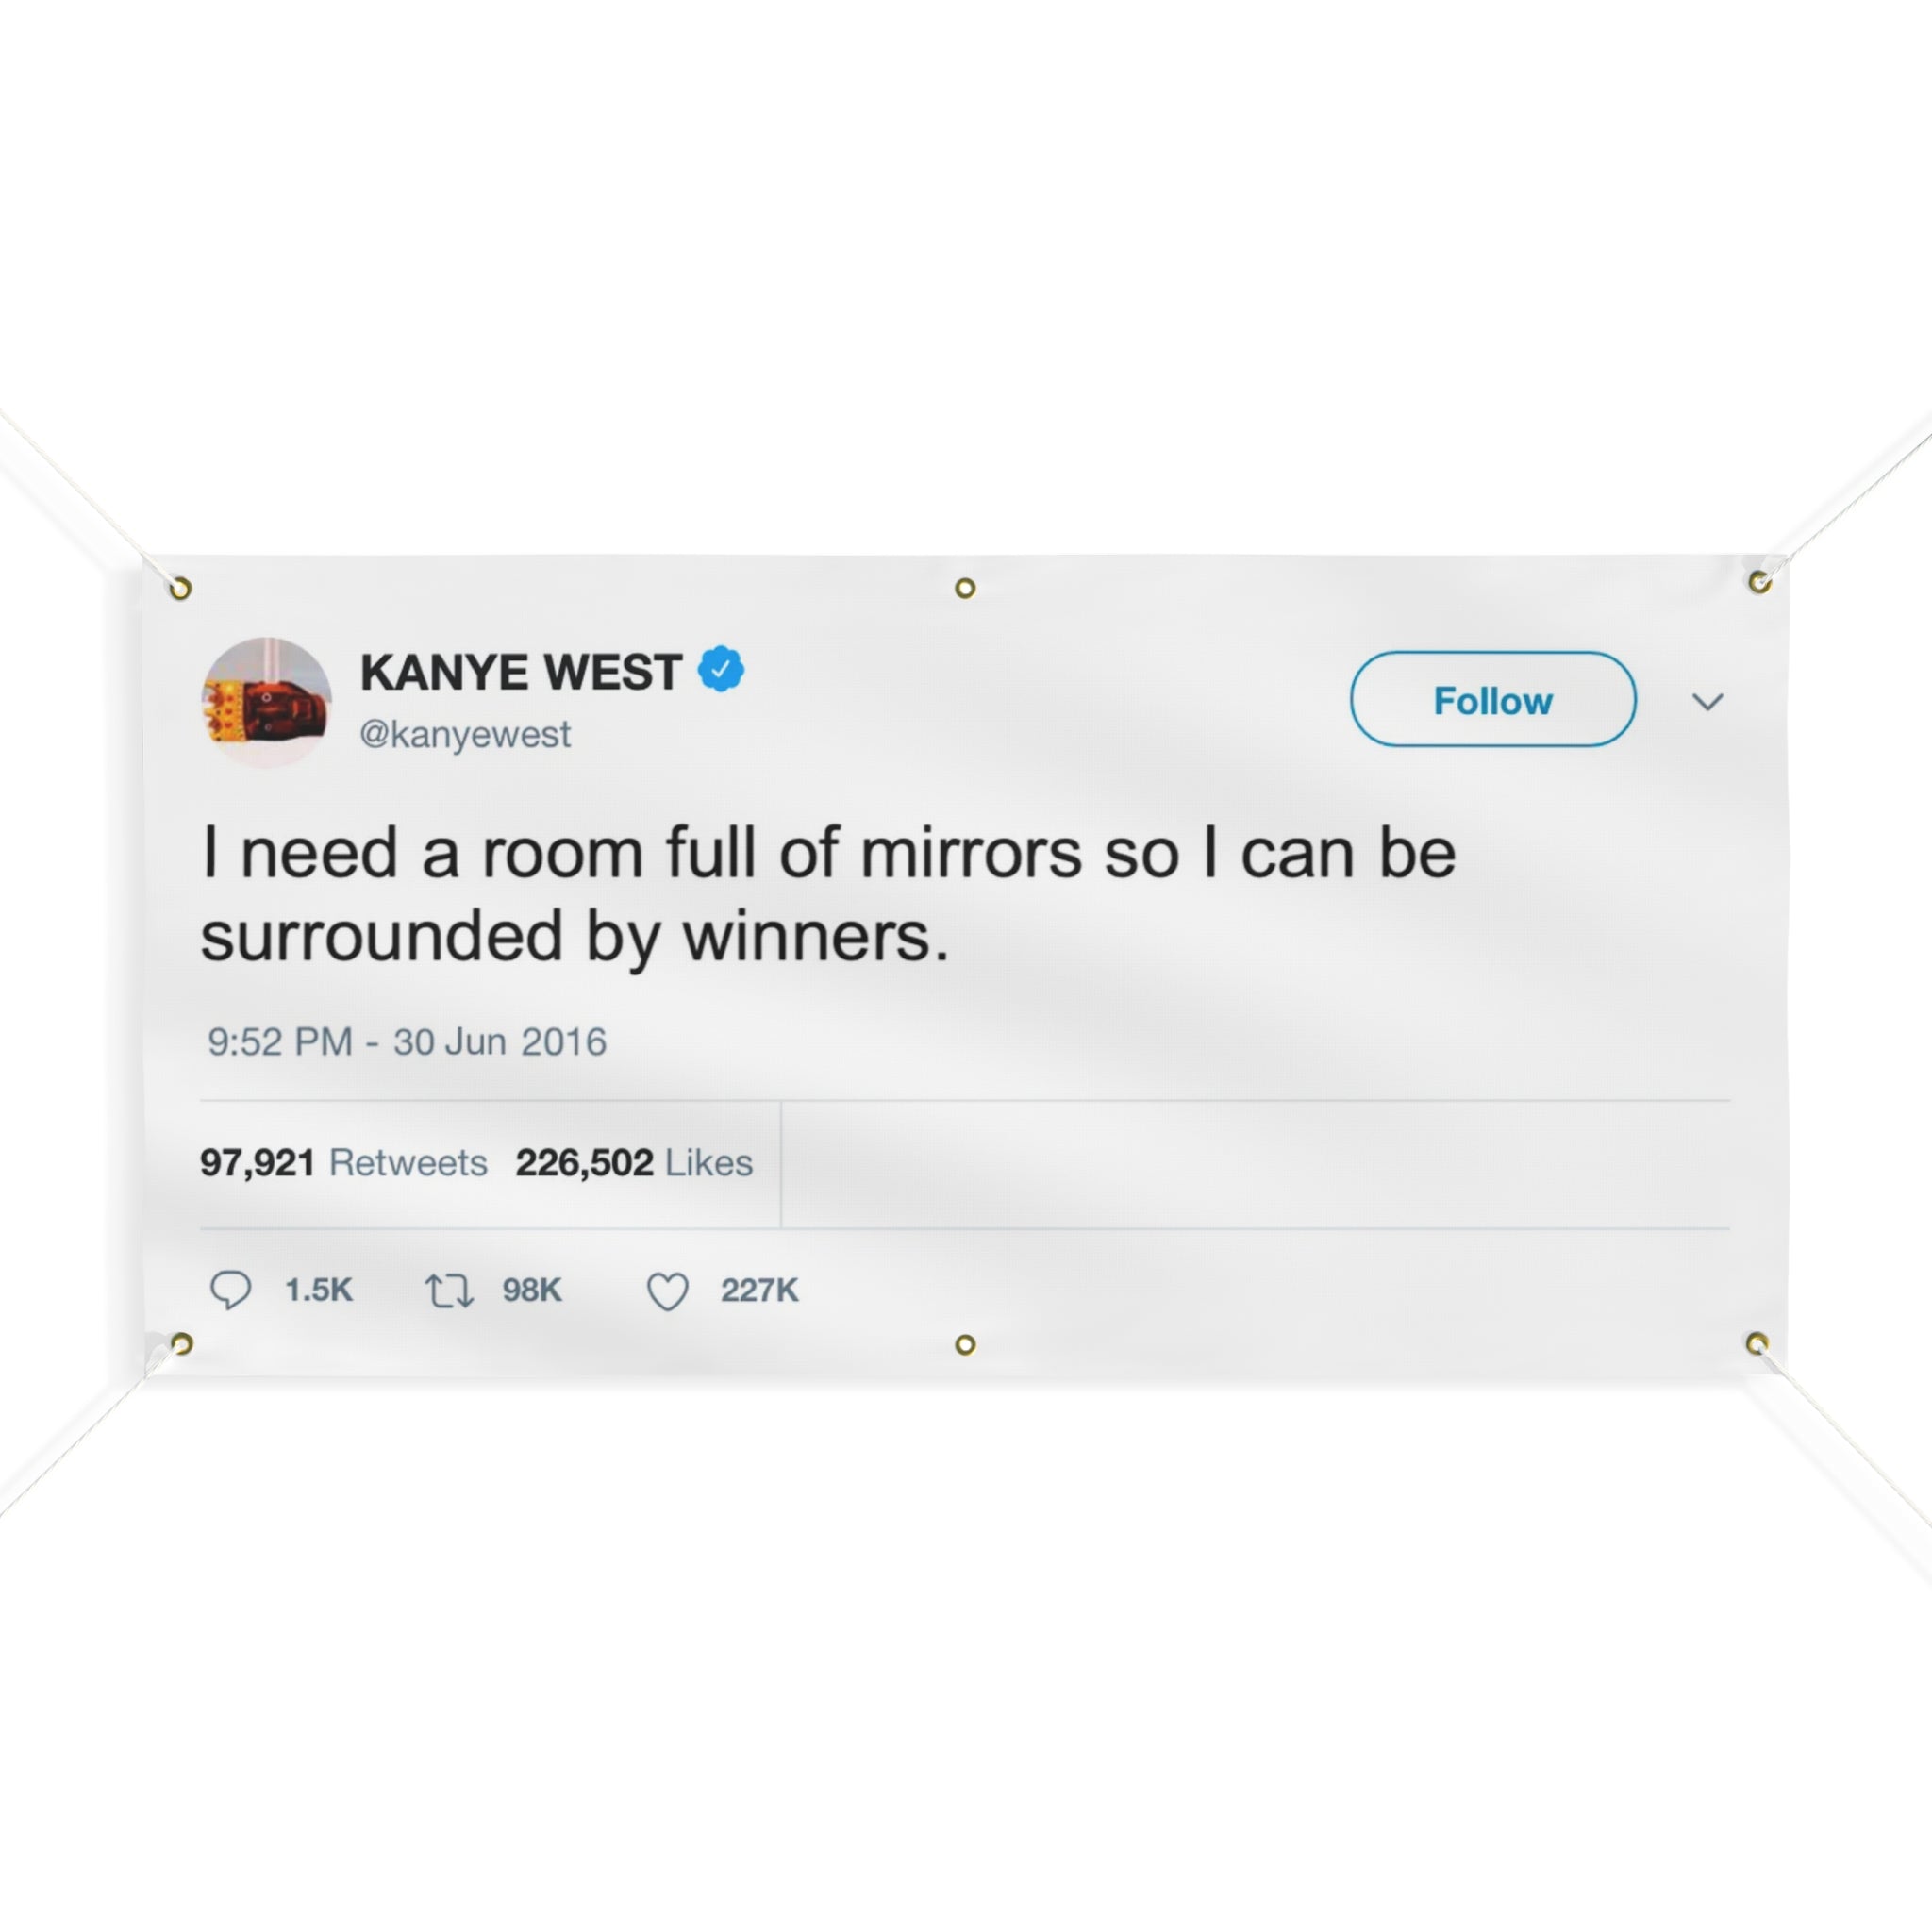 Kanye Tweet "I need a room full of mirrors so I can be surrounded by winners" - Flag